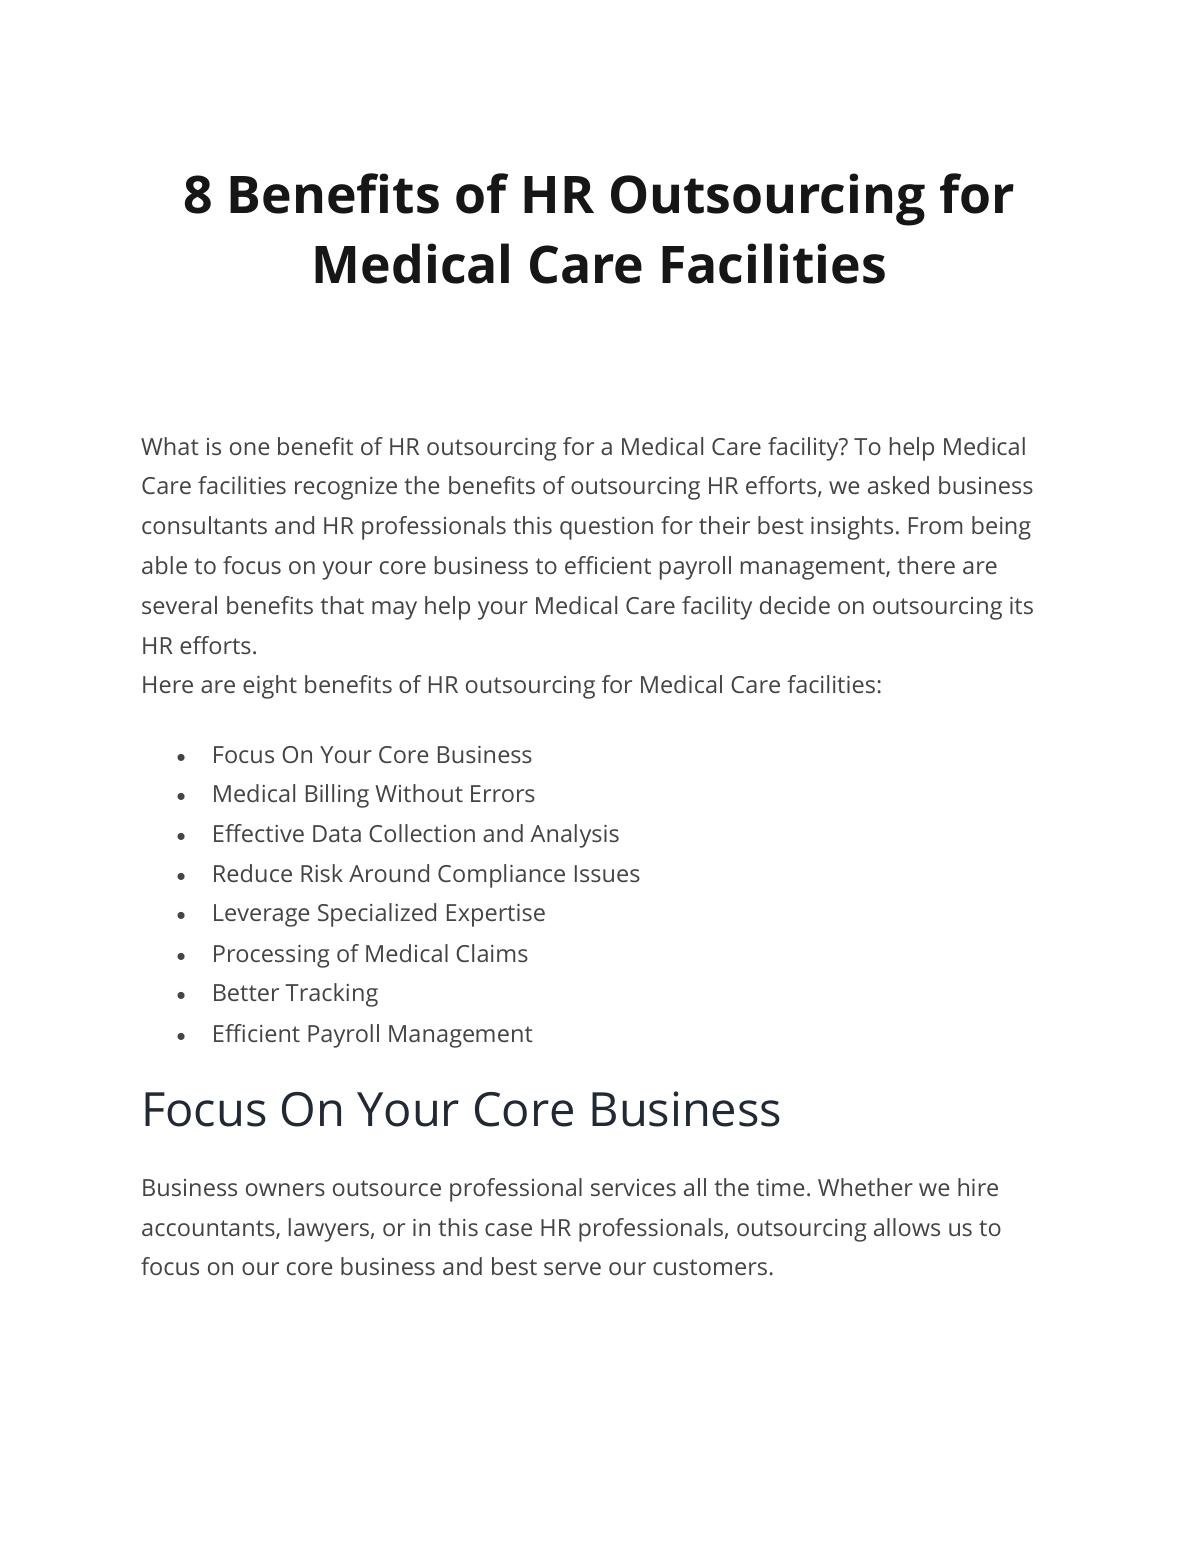 8 Benefits of HR Outsourcing for Medical Care Facilities